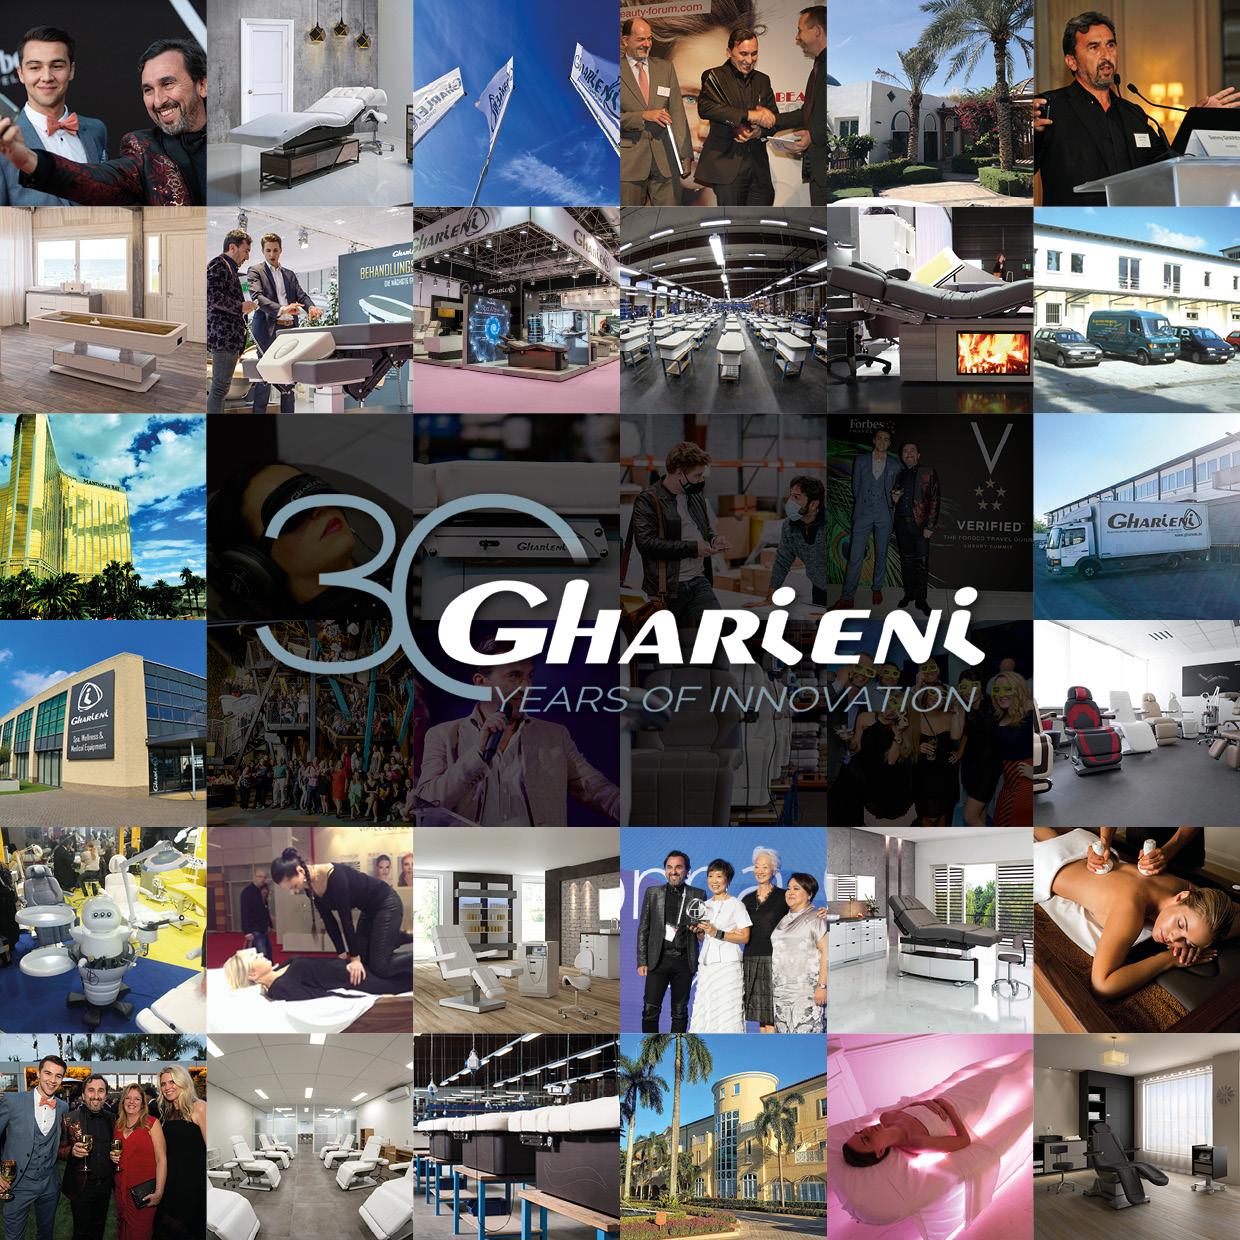 Gharieni has grown into a global company with clients across 120 countries worldwide